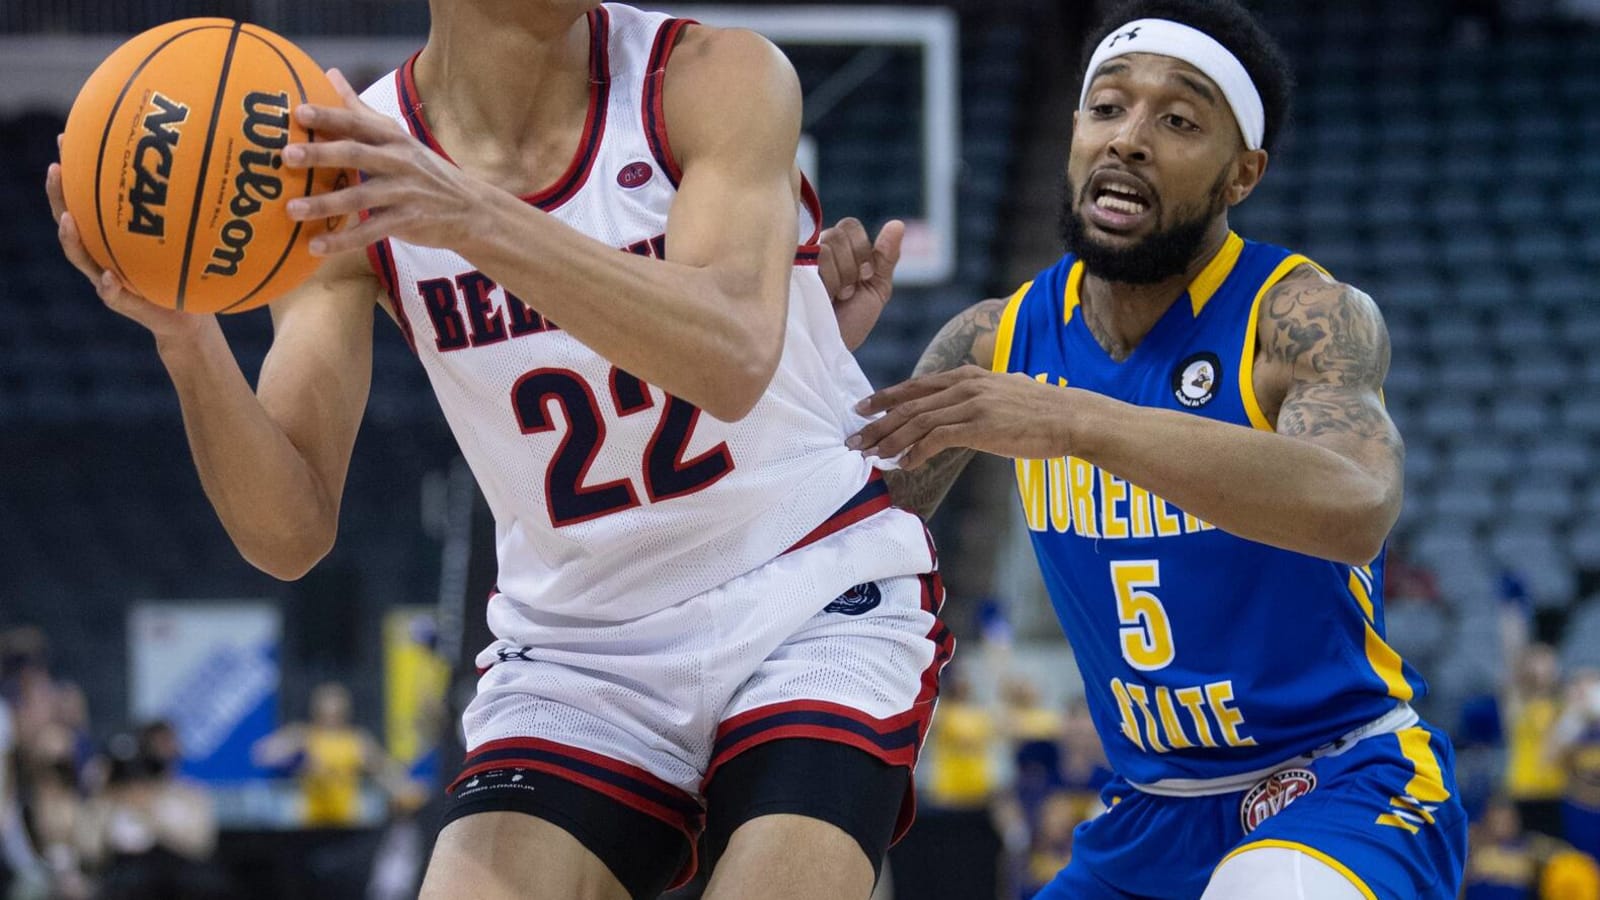 Indiana Pacers rookie Ben Sheppard pops at Summer League with hard play and accurate outside shot